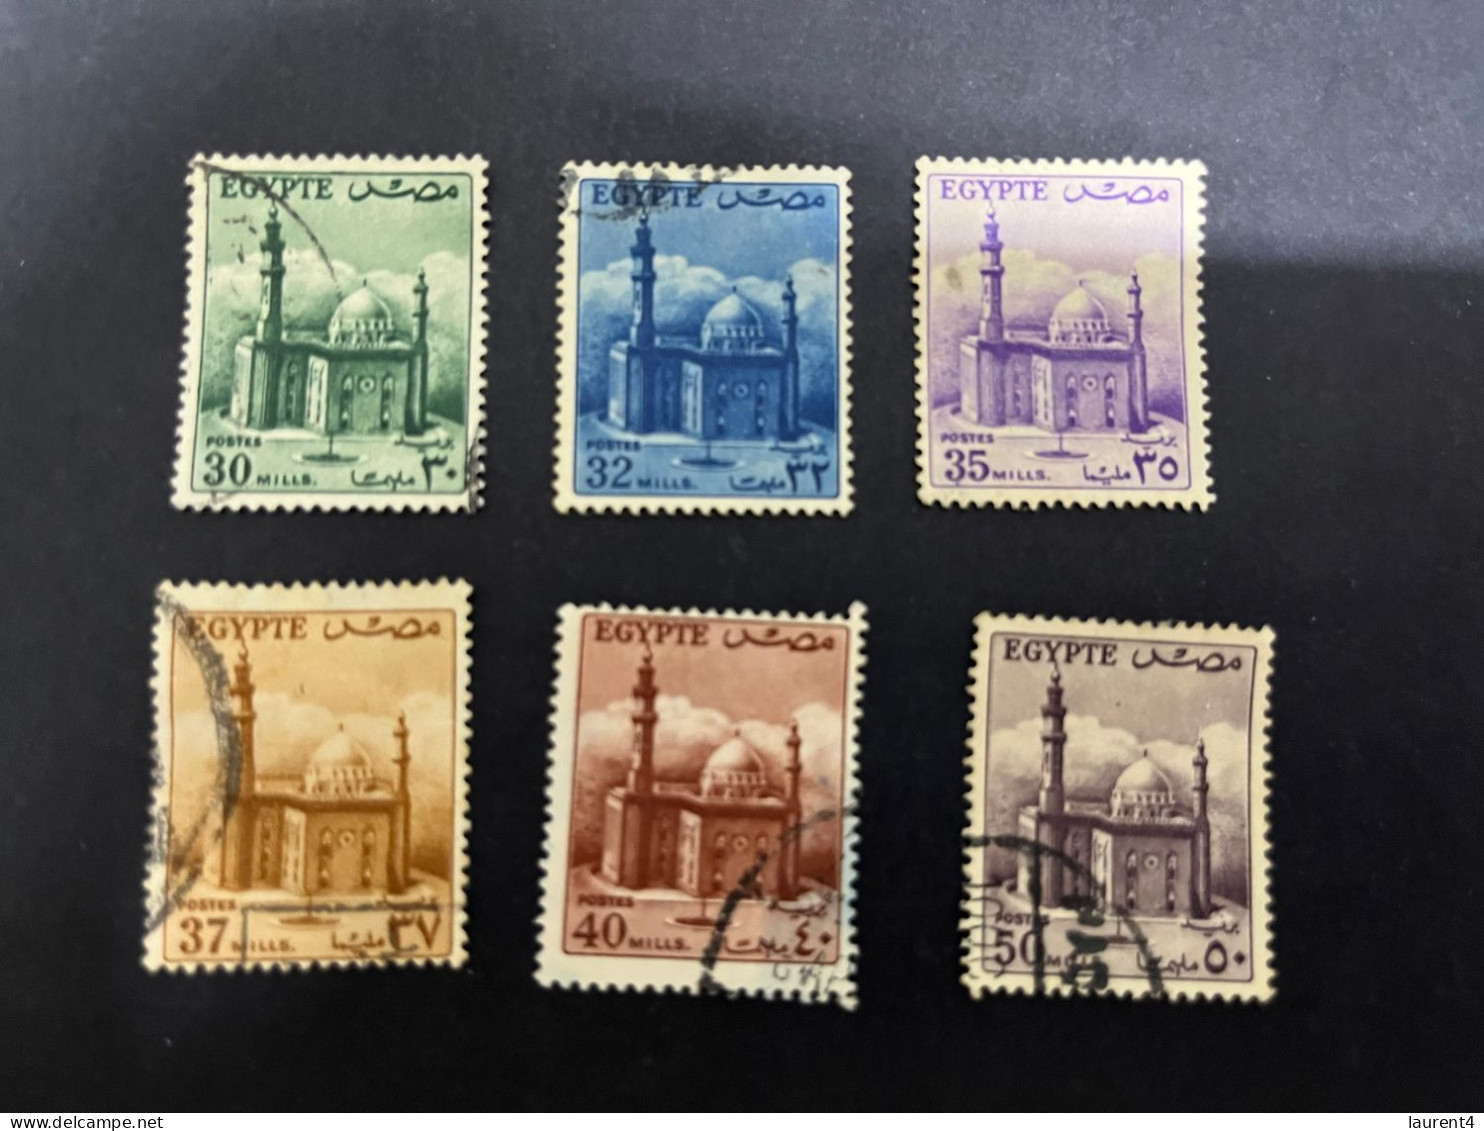 8-1-2024 (stamp) 6 Older Cancelled Stamp From Egypt (Mosque) - Usati